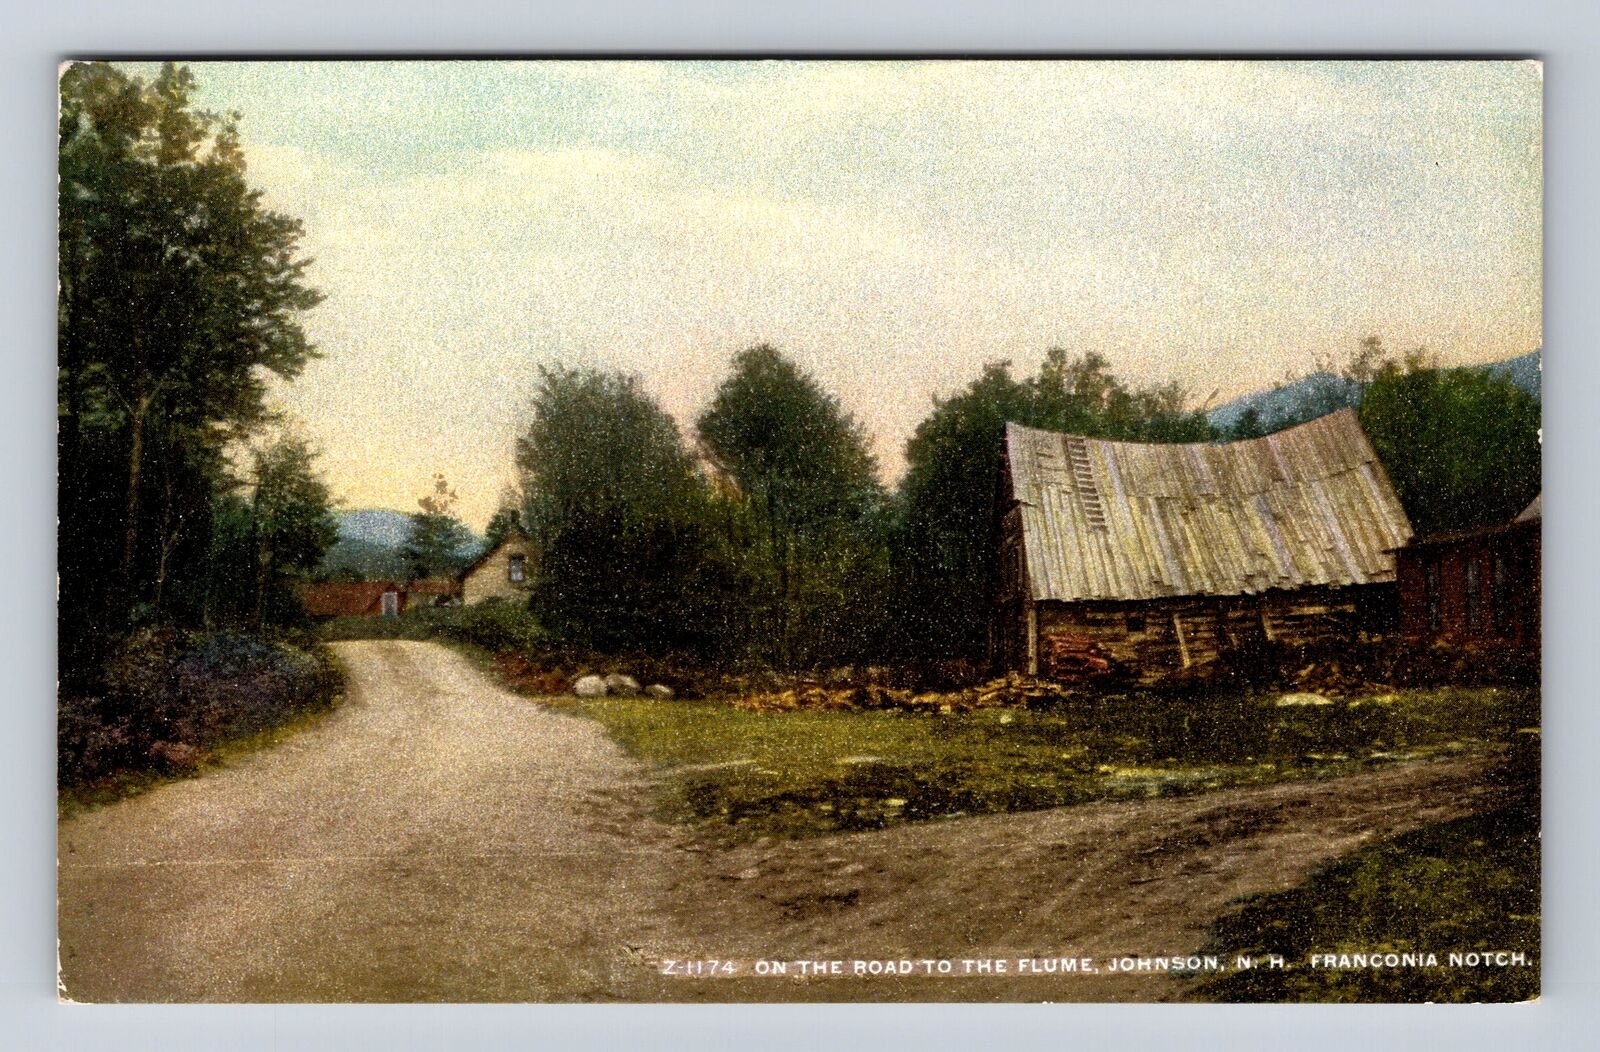 Johnson NH-New Hampshire, On Road To The Flume, Franconia Notch Vintage Postcard